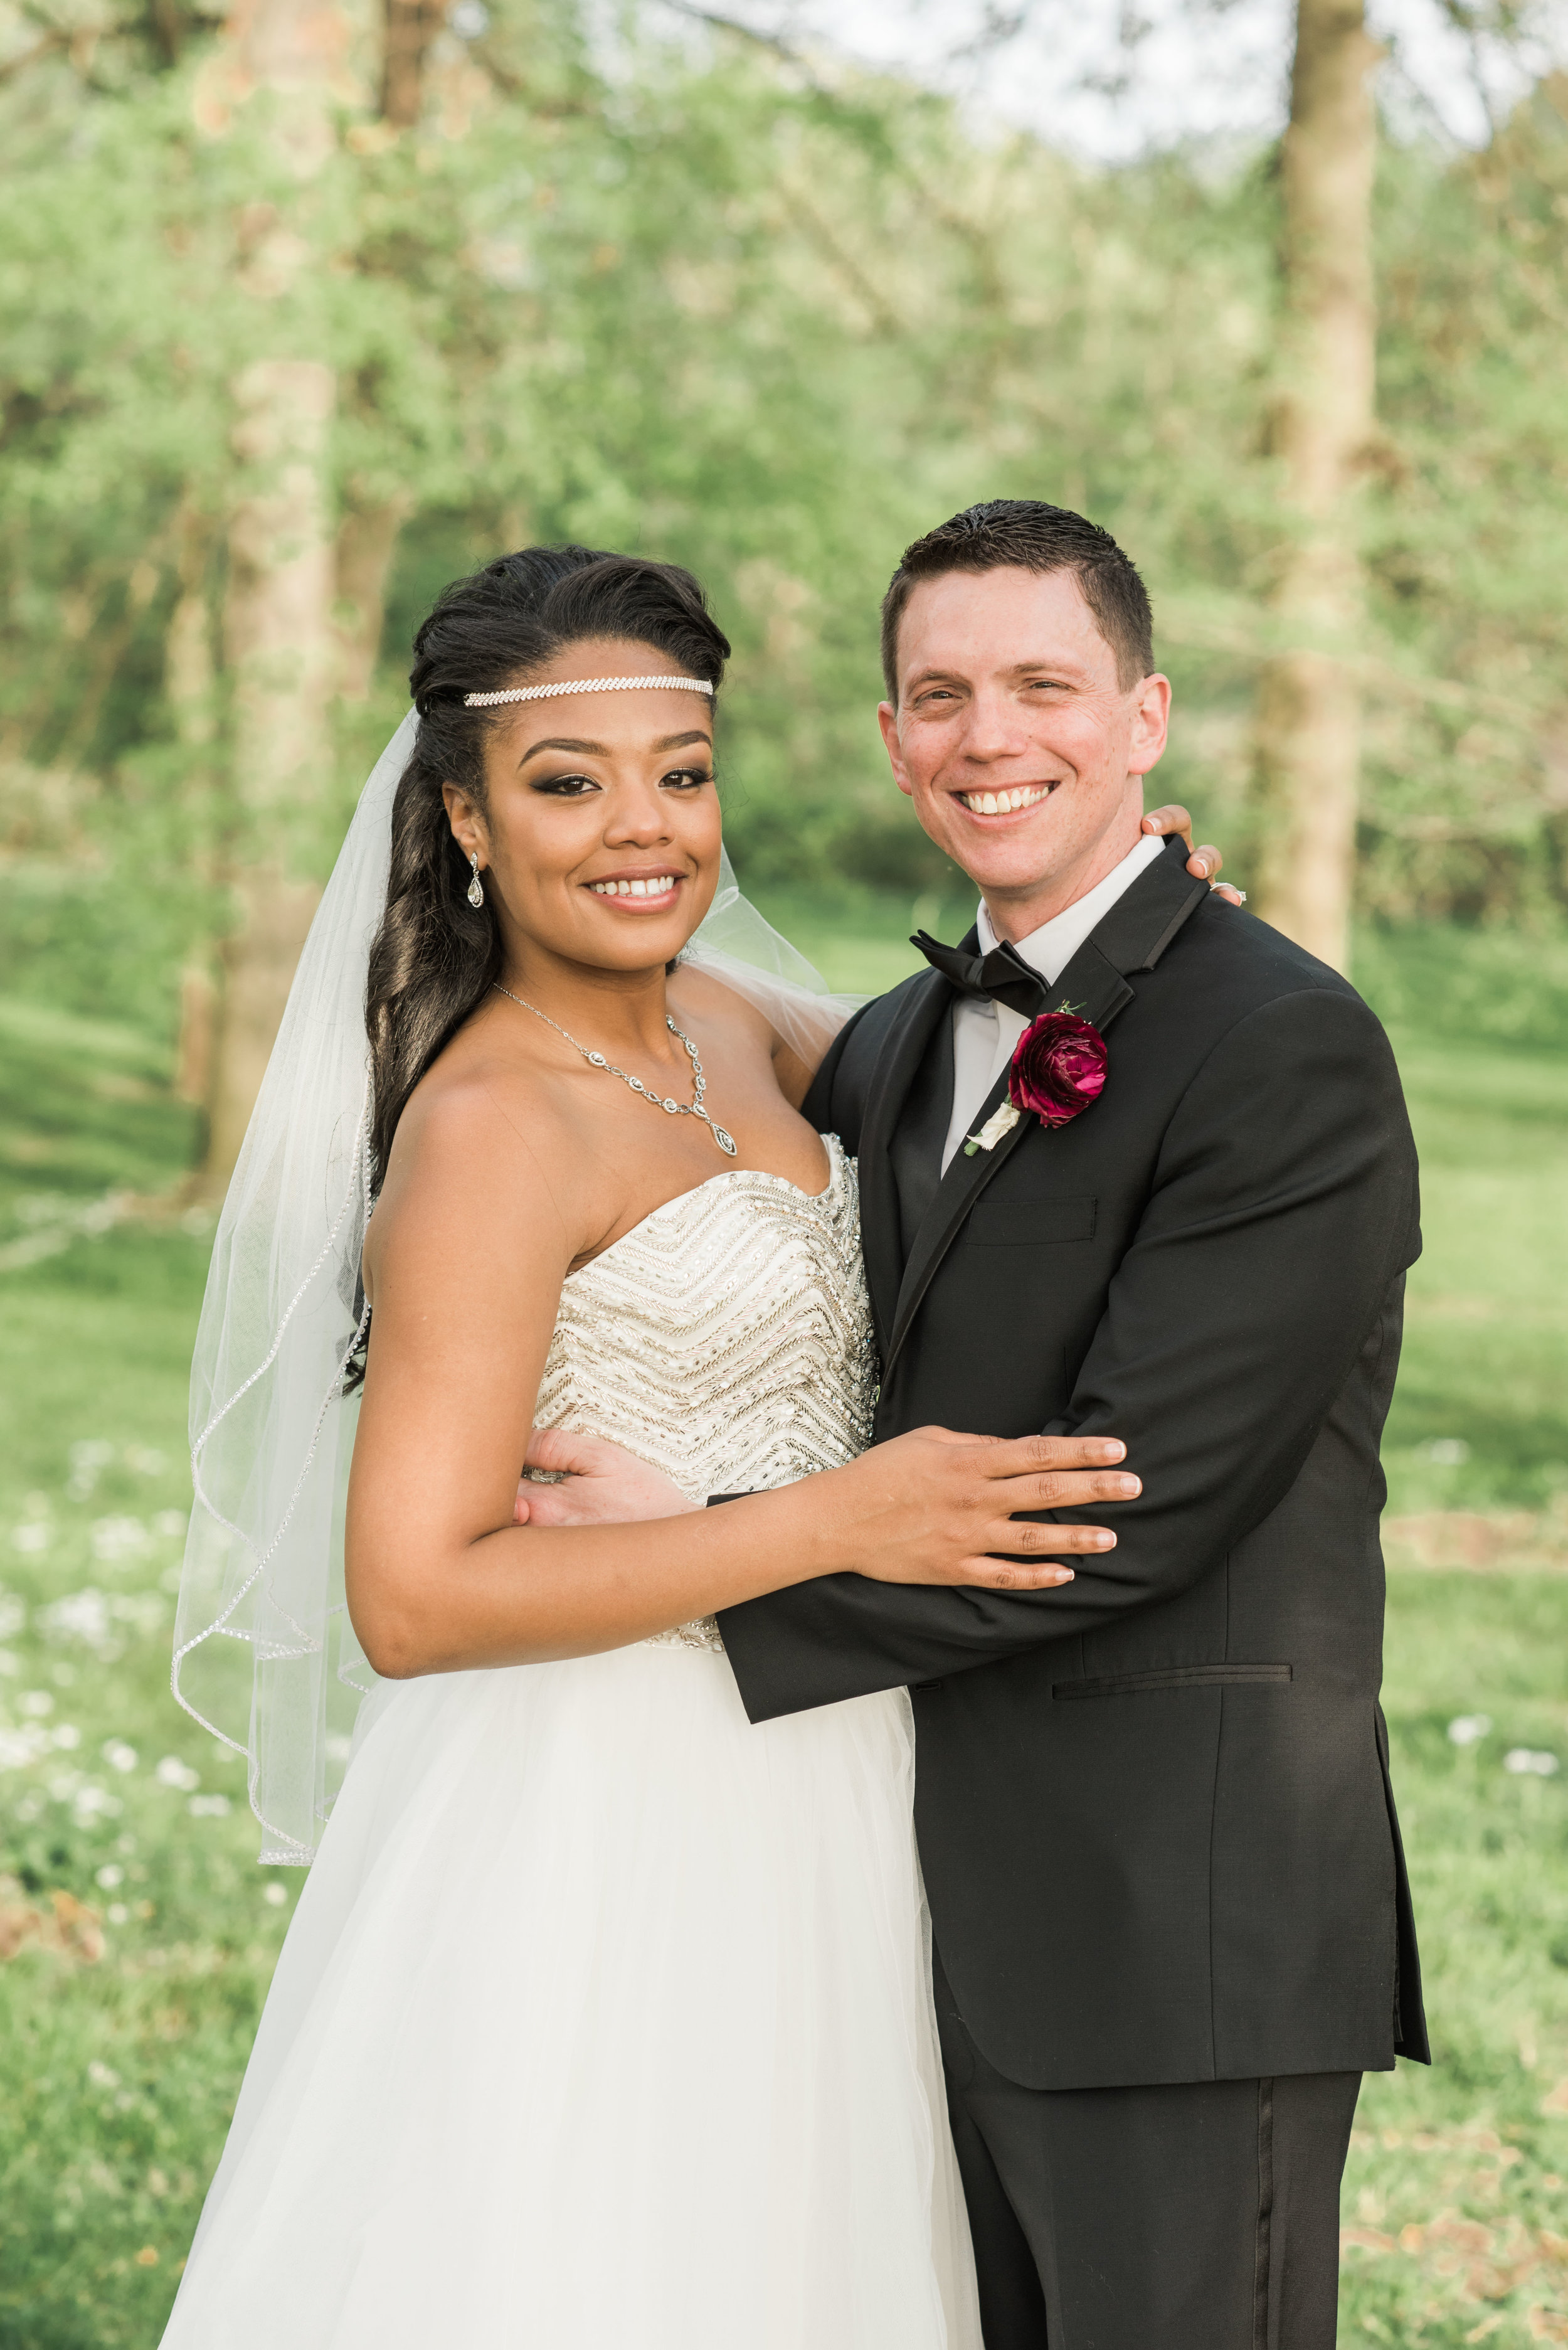 bride and groom, just married, bridal portrait, african american bride and white groom, mixed race bride and groom, bride and groom poses, good looking bride and groom